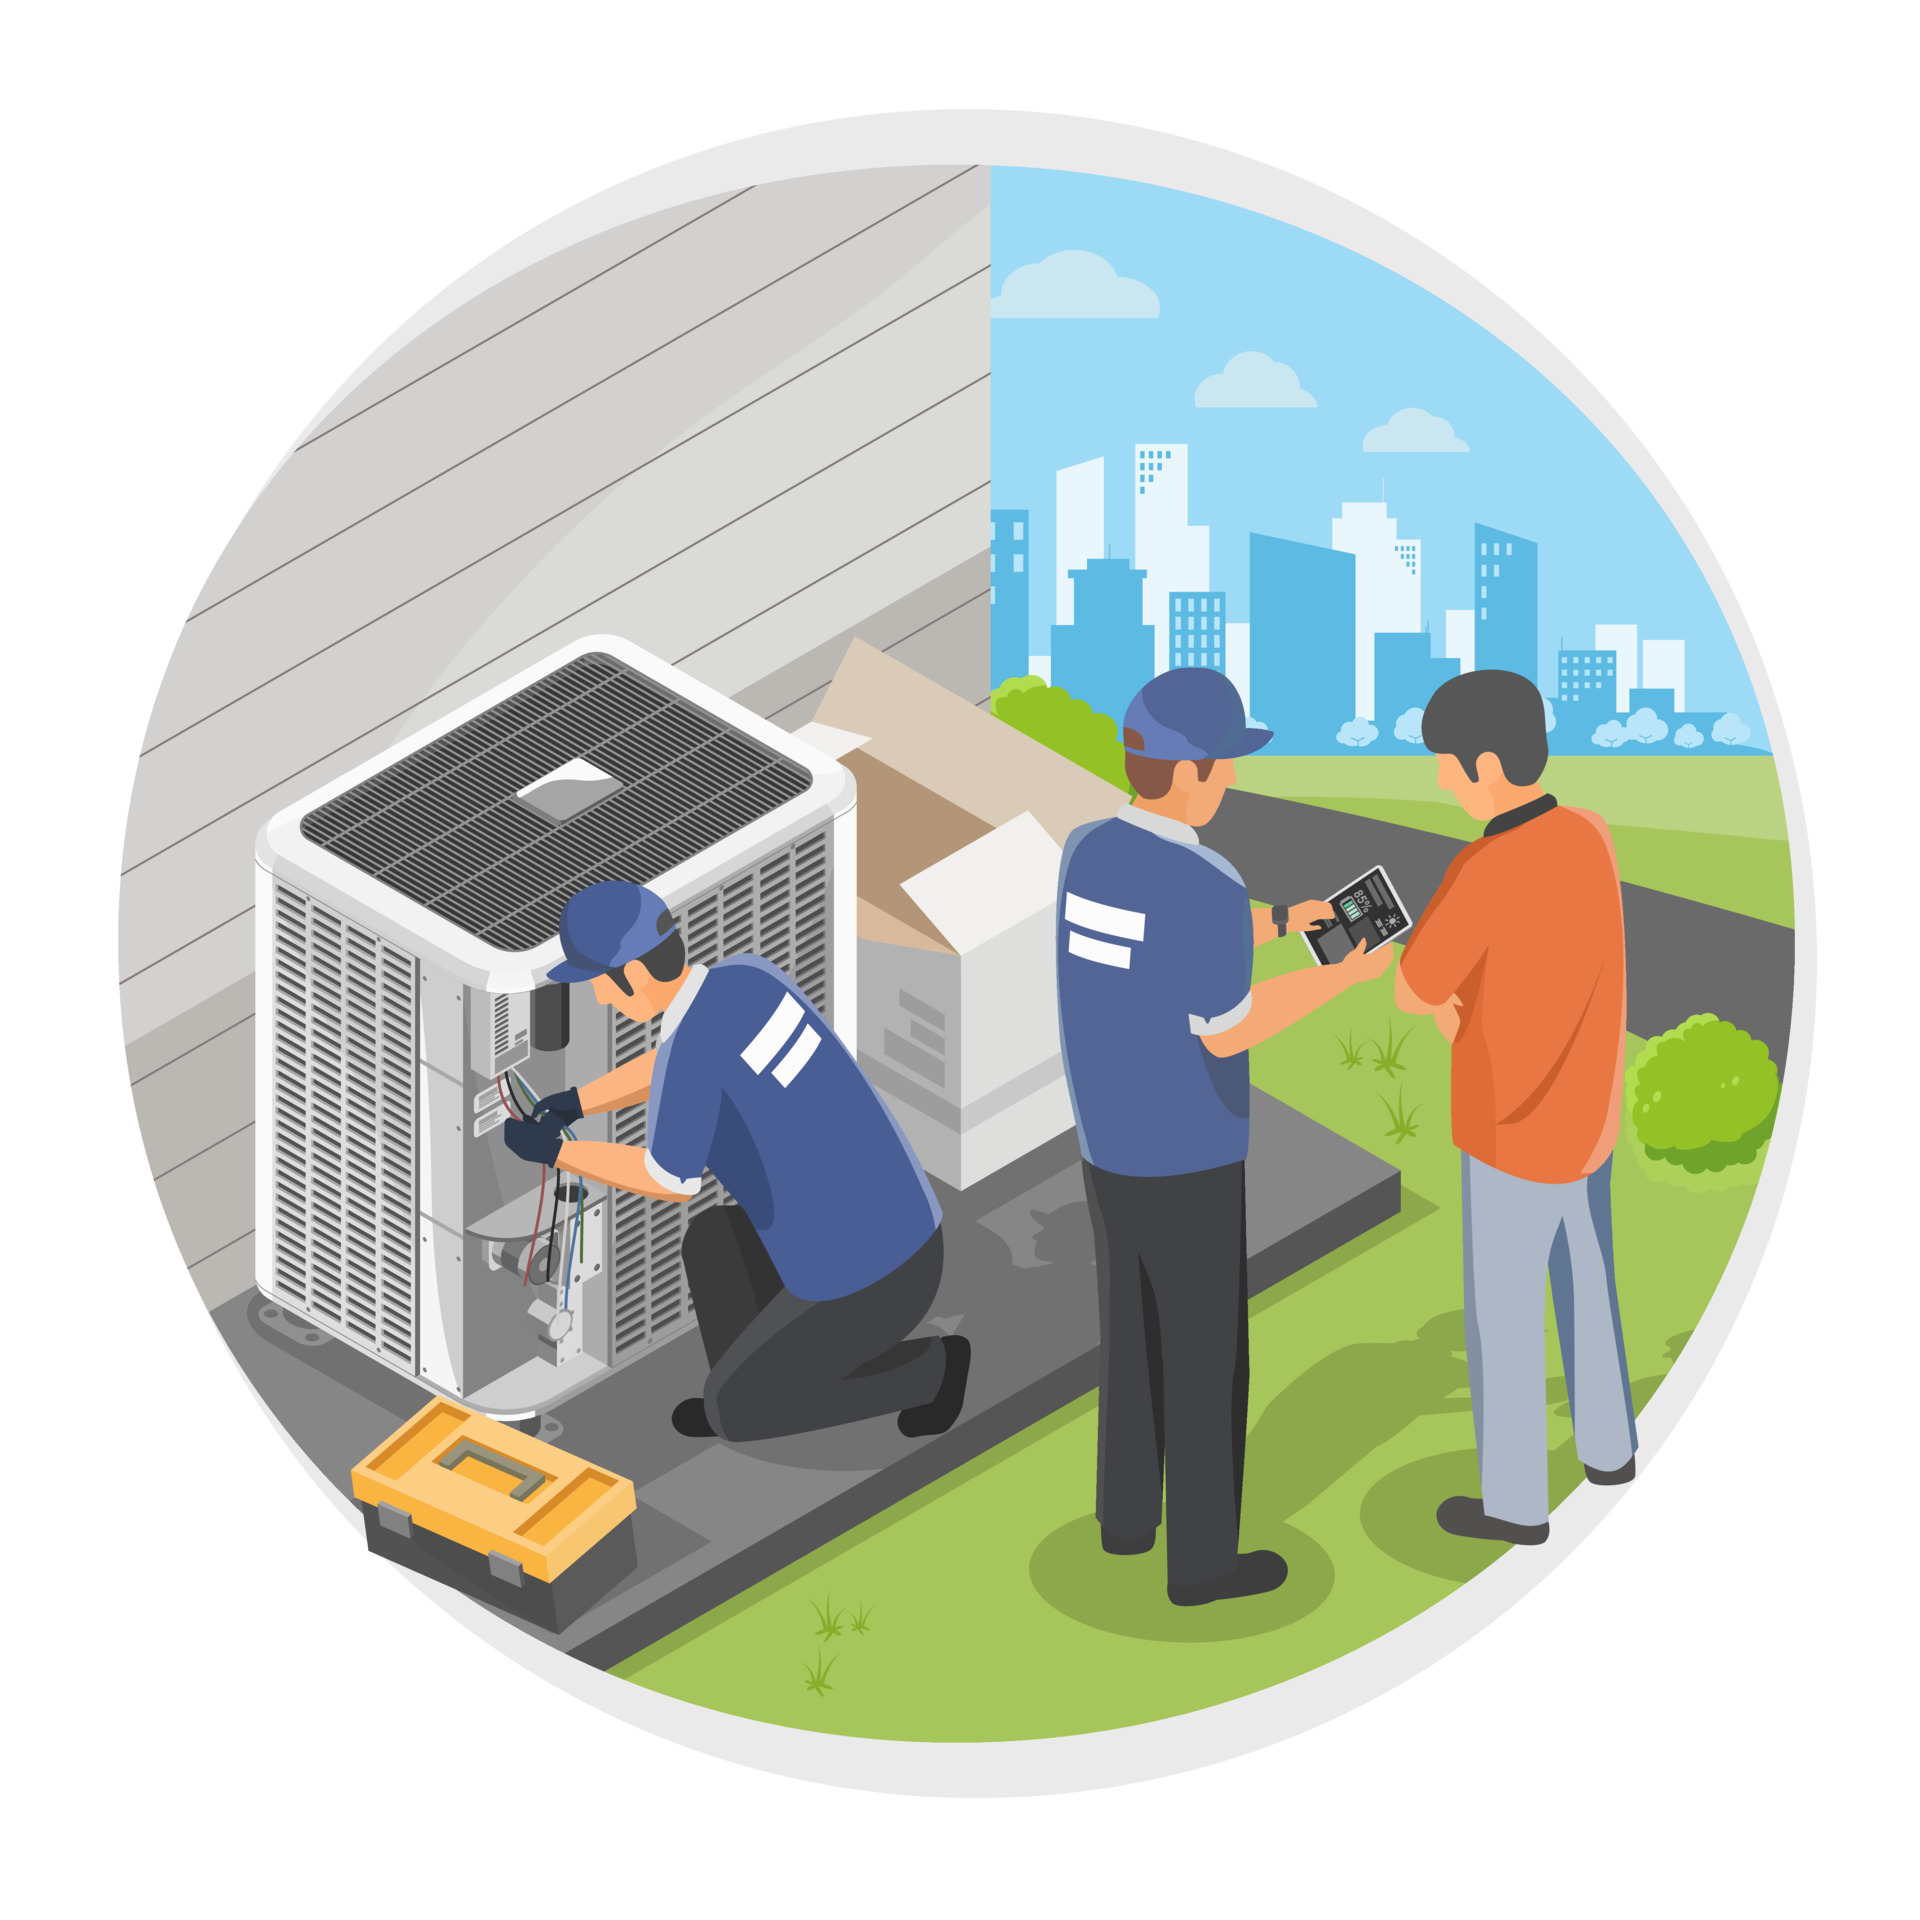 vecteezy_hvac-installation-and-maintenance-team-house-service-at-home_22651484